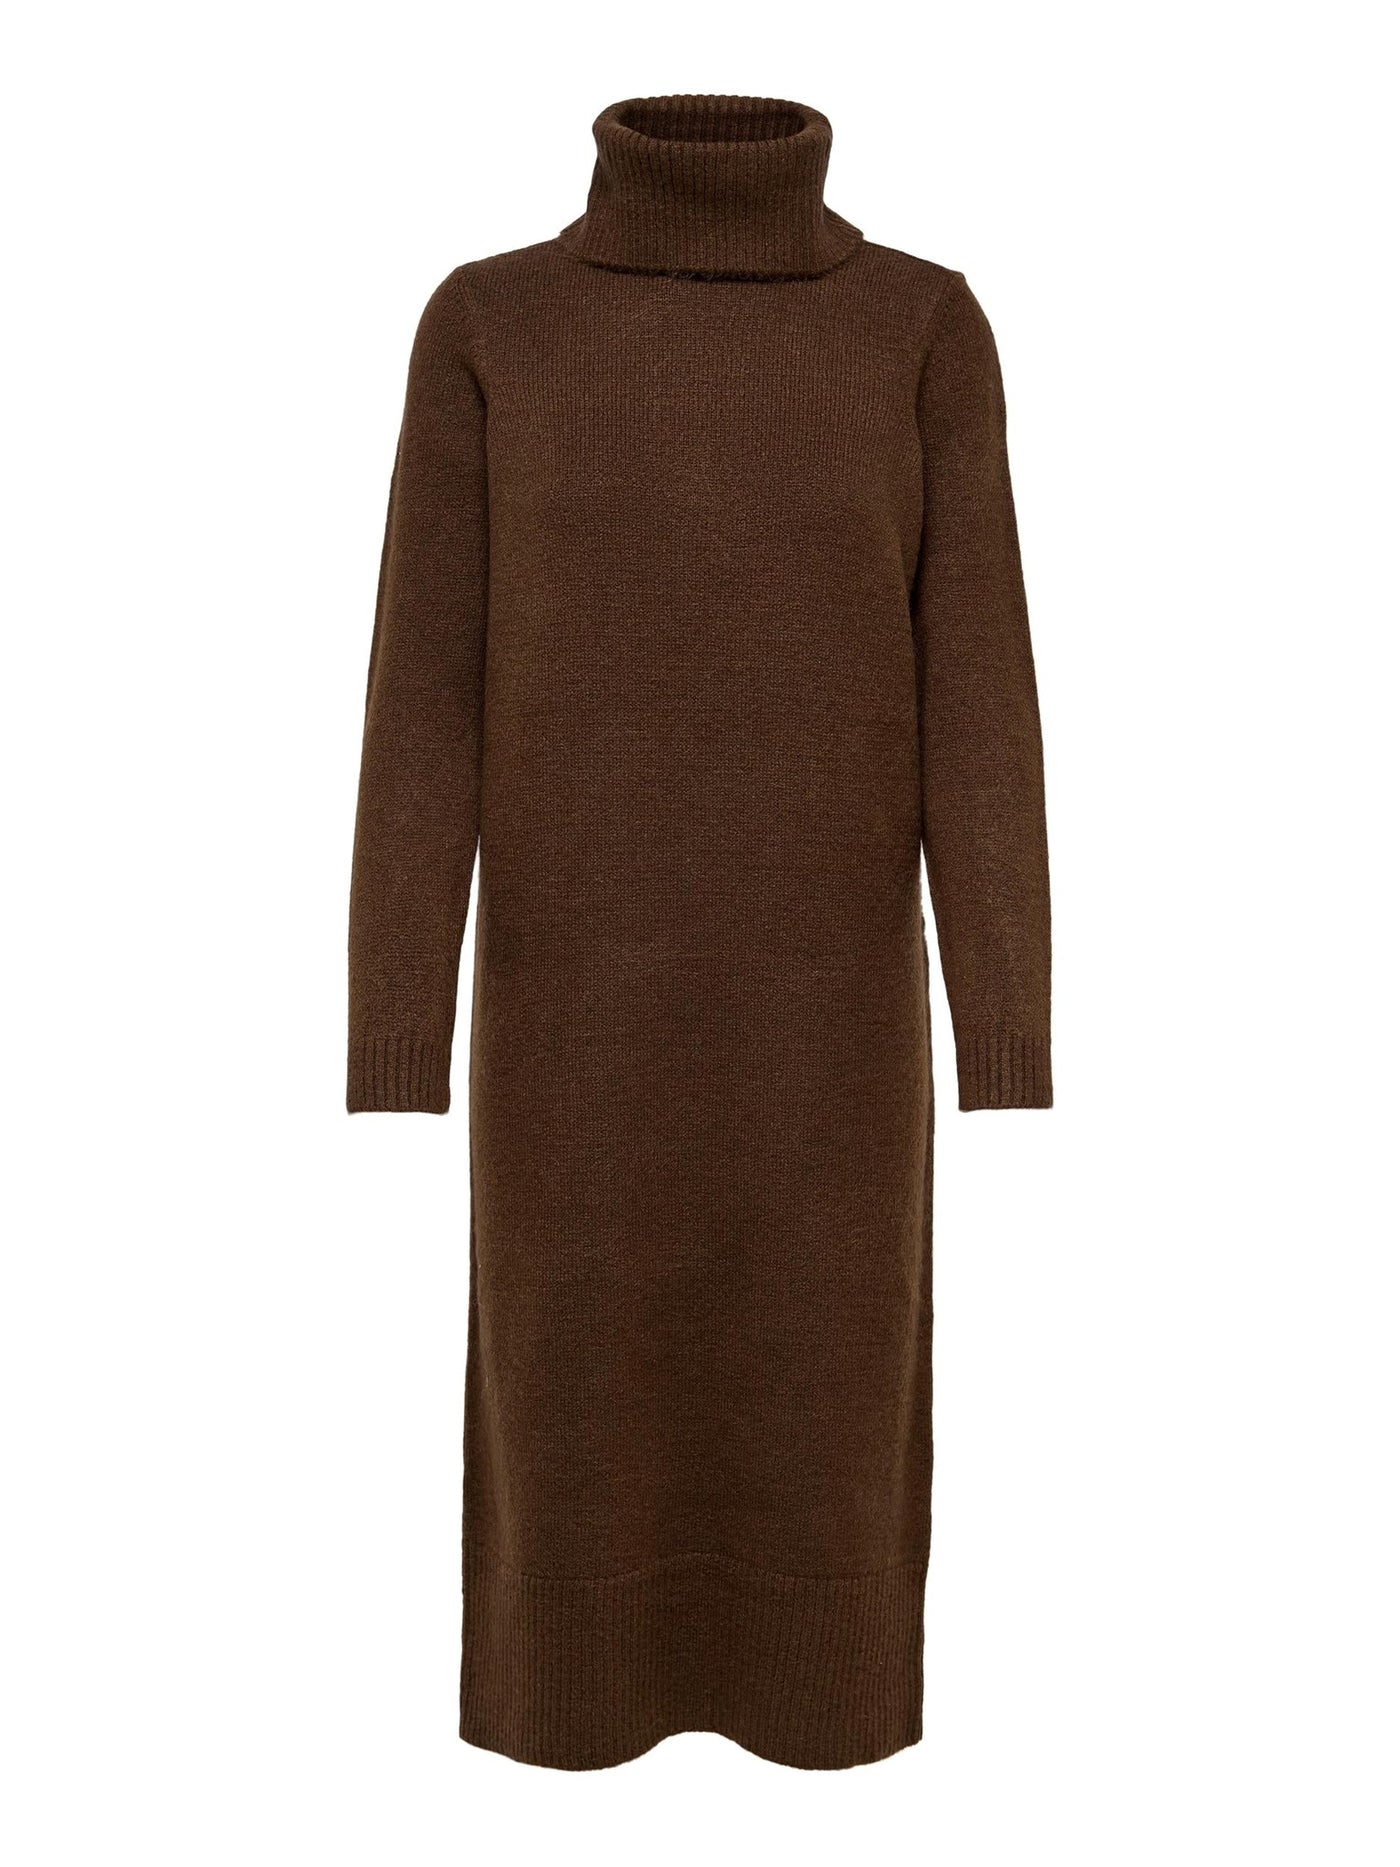 Brandie Roll Neck Dress - Chicory Coffee - ONLY 5